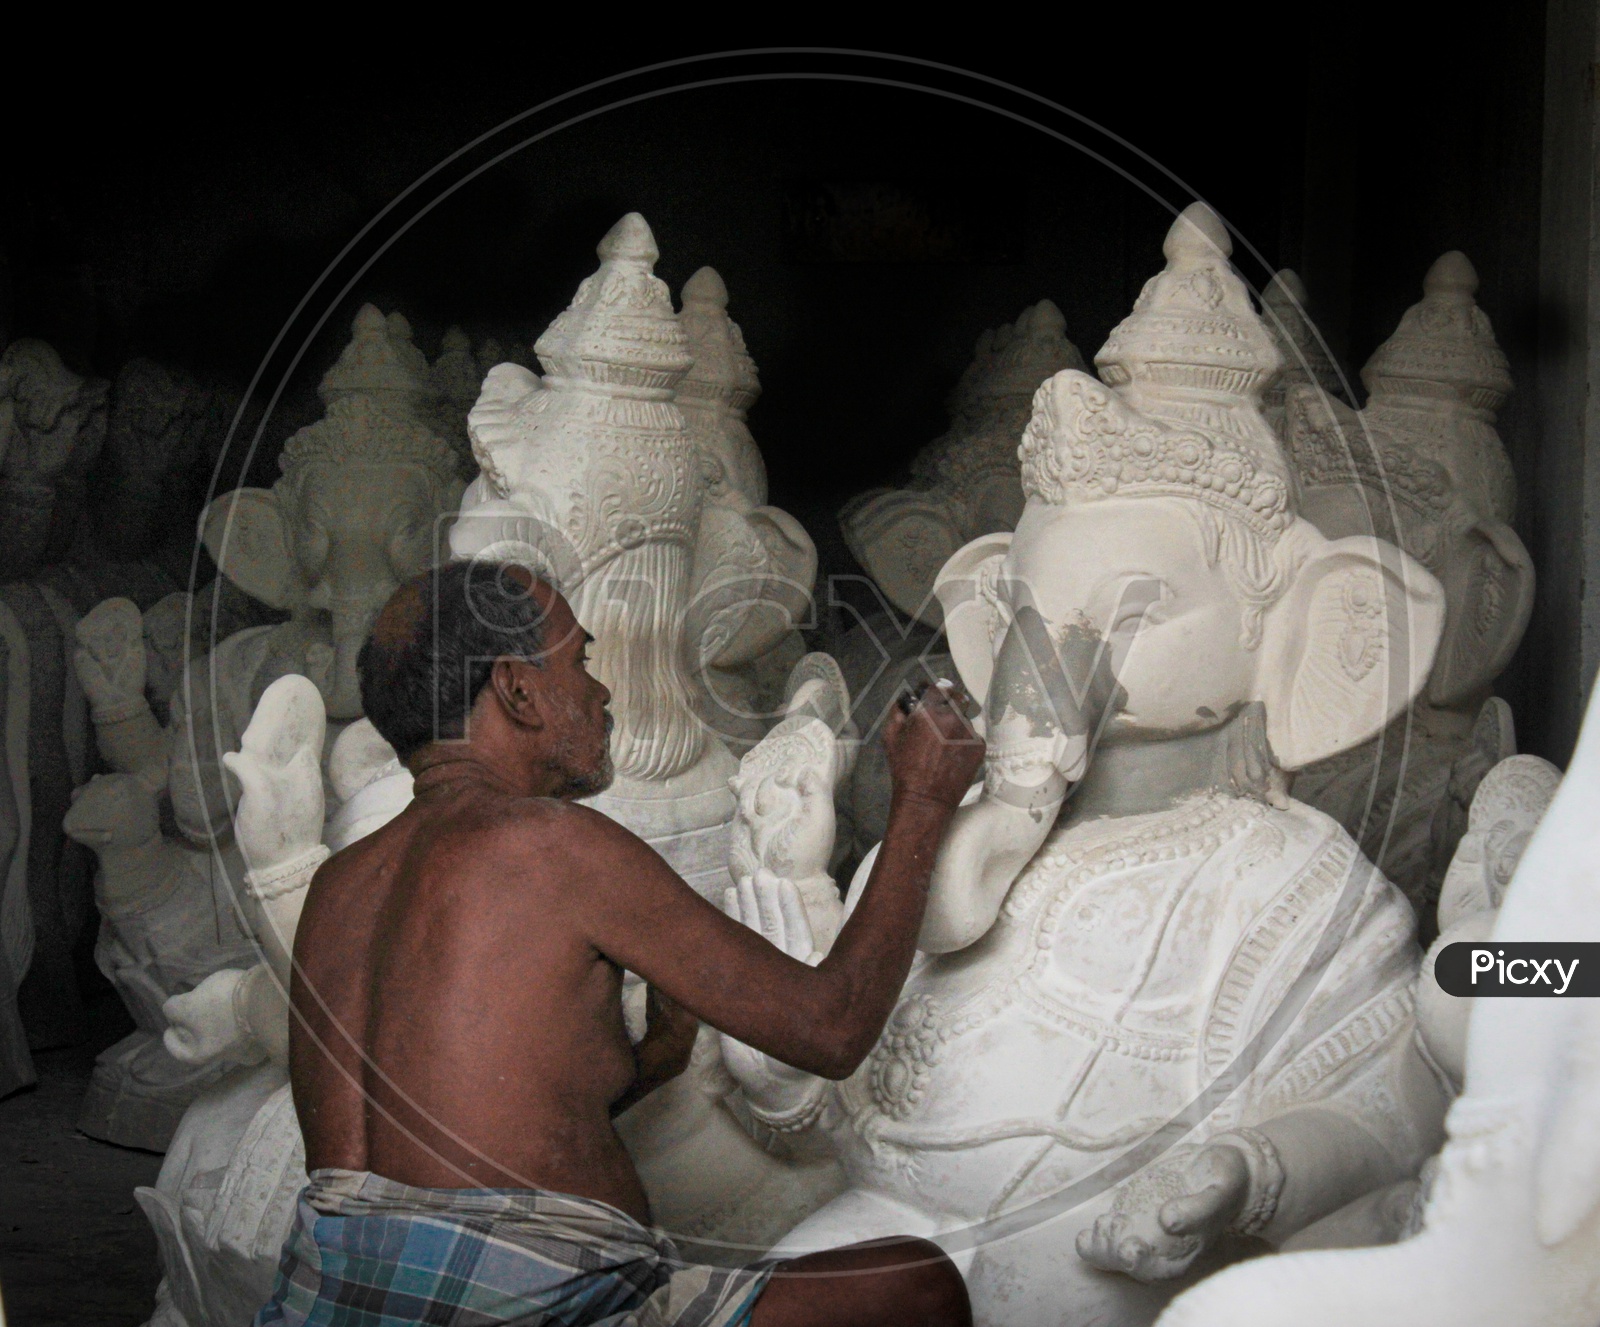 A man fixing different parts of  ganesh idol accordingly.